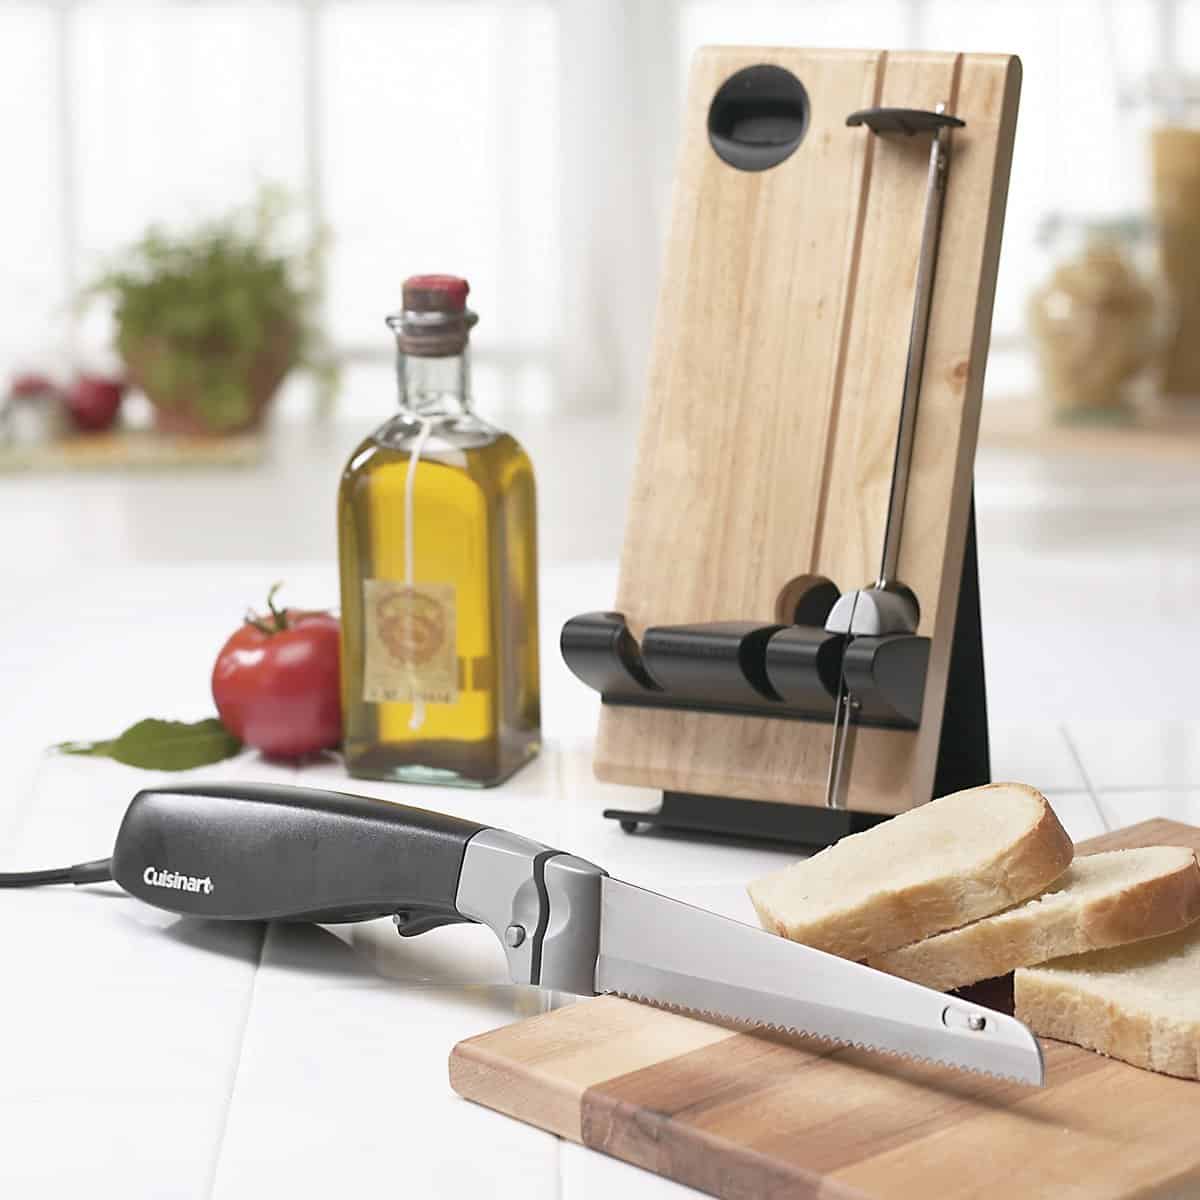 What are some popular electric knives?